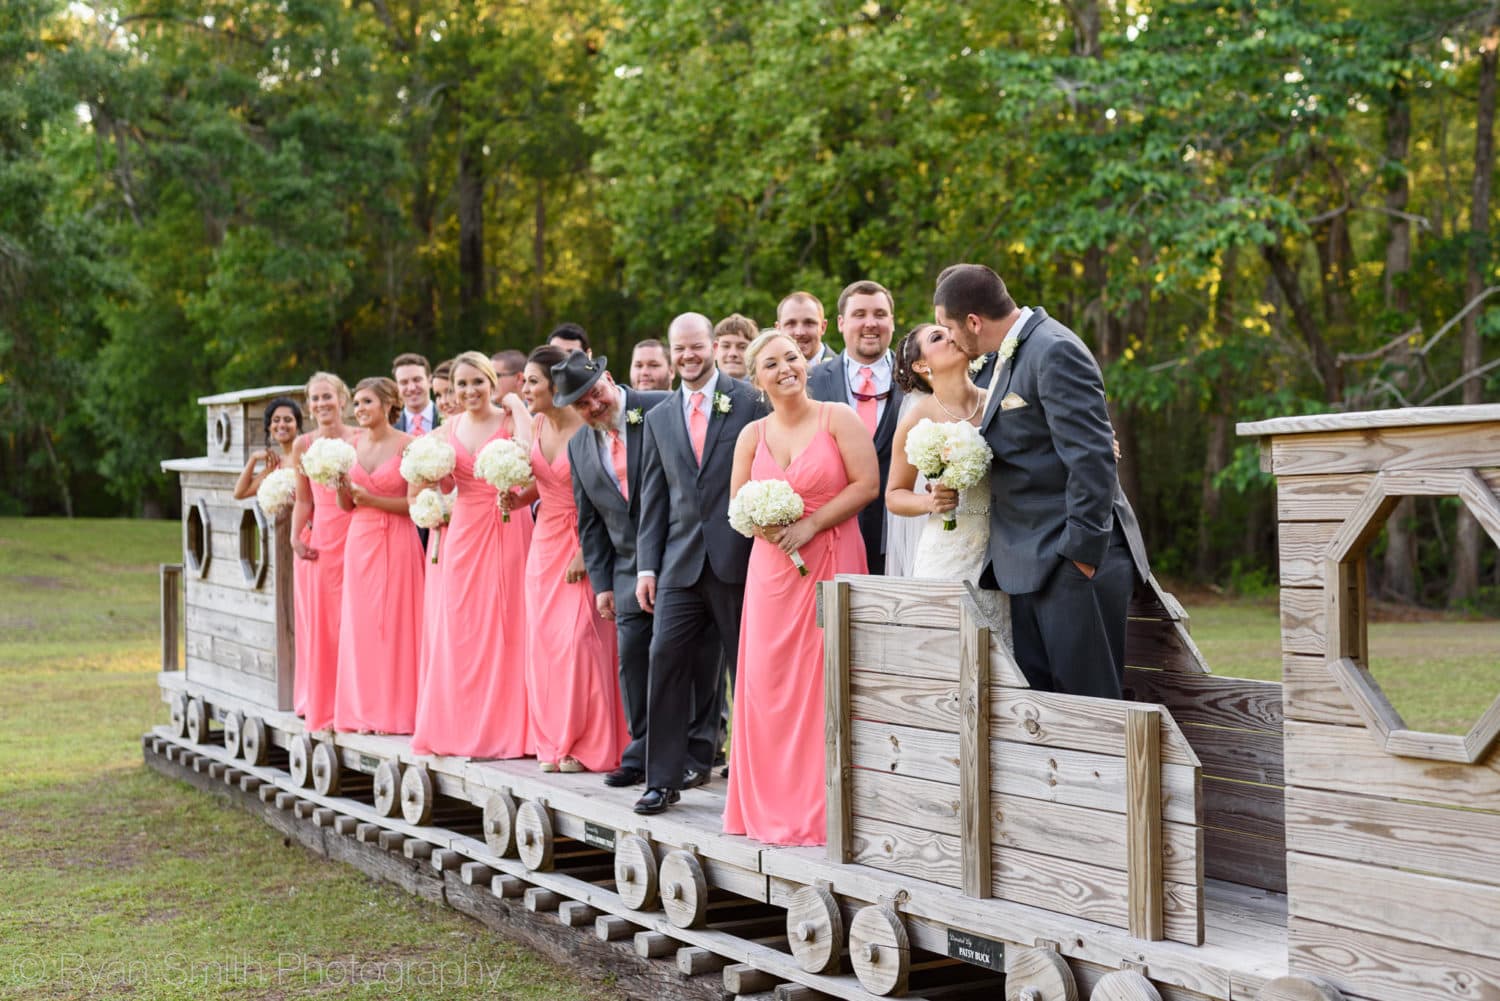 Wedding party on the train - Upper Mill Plantation